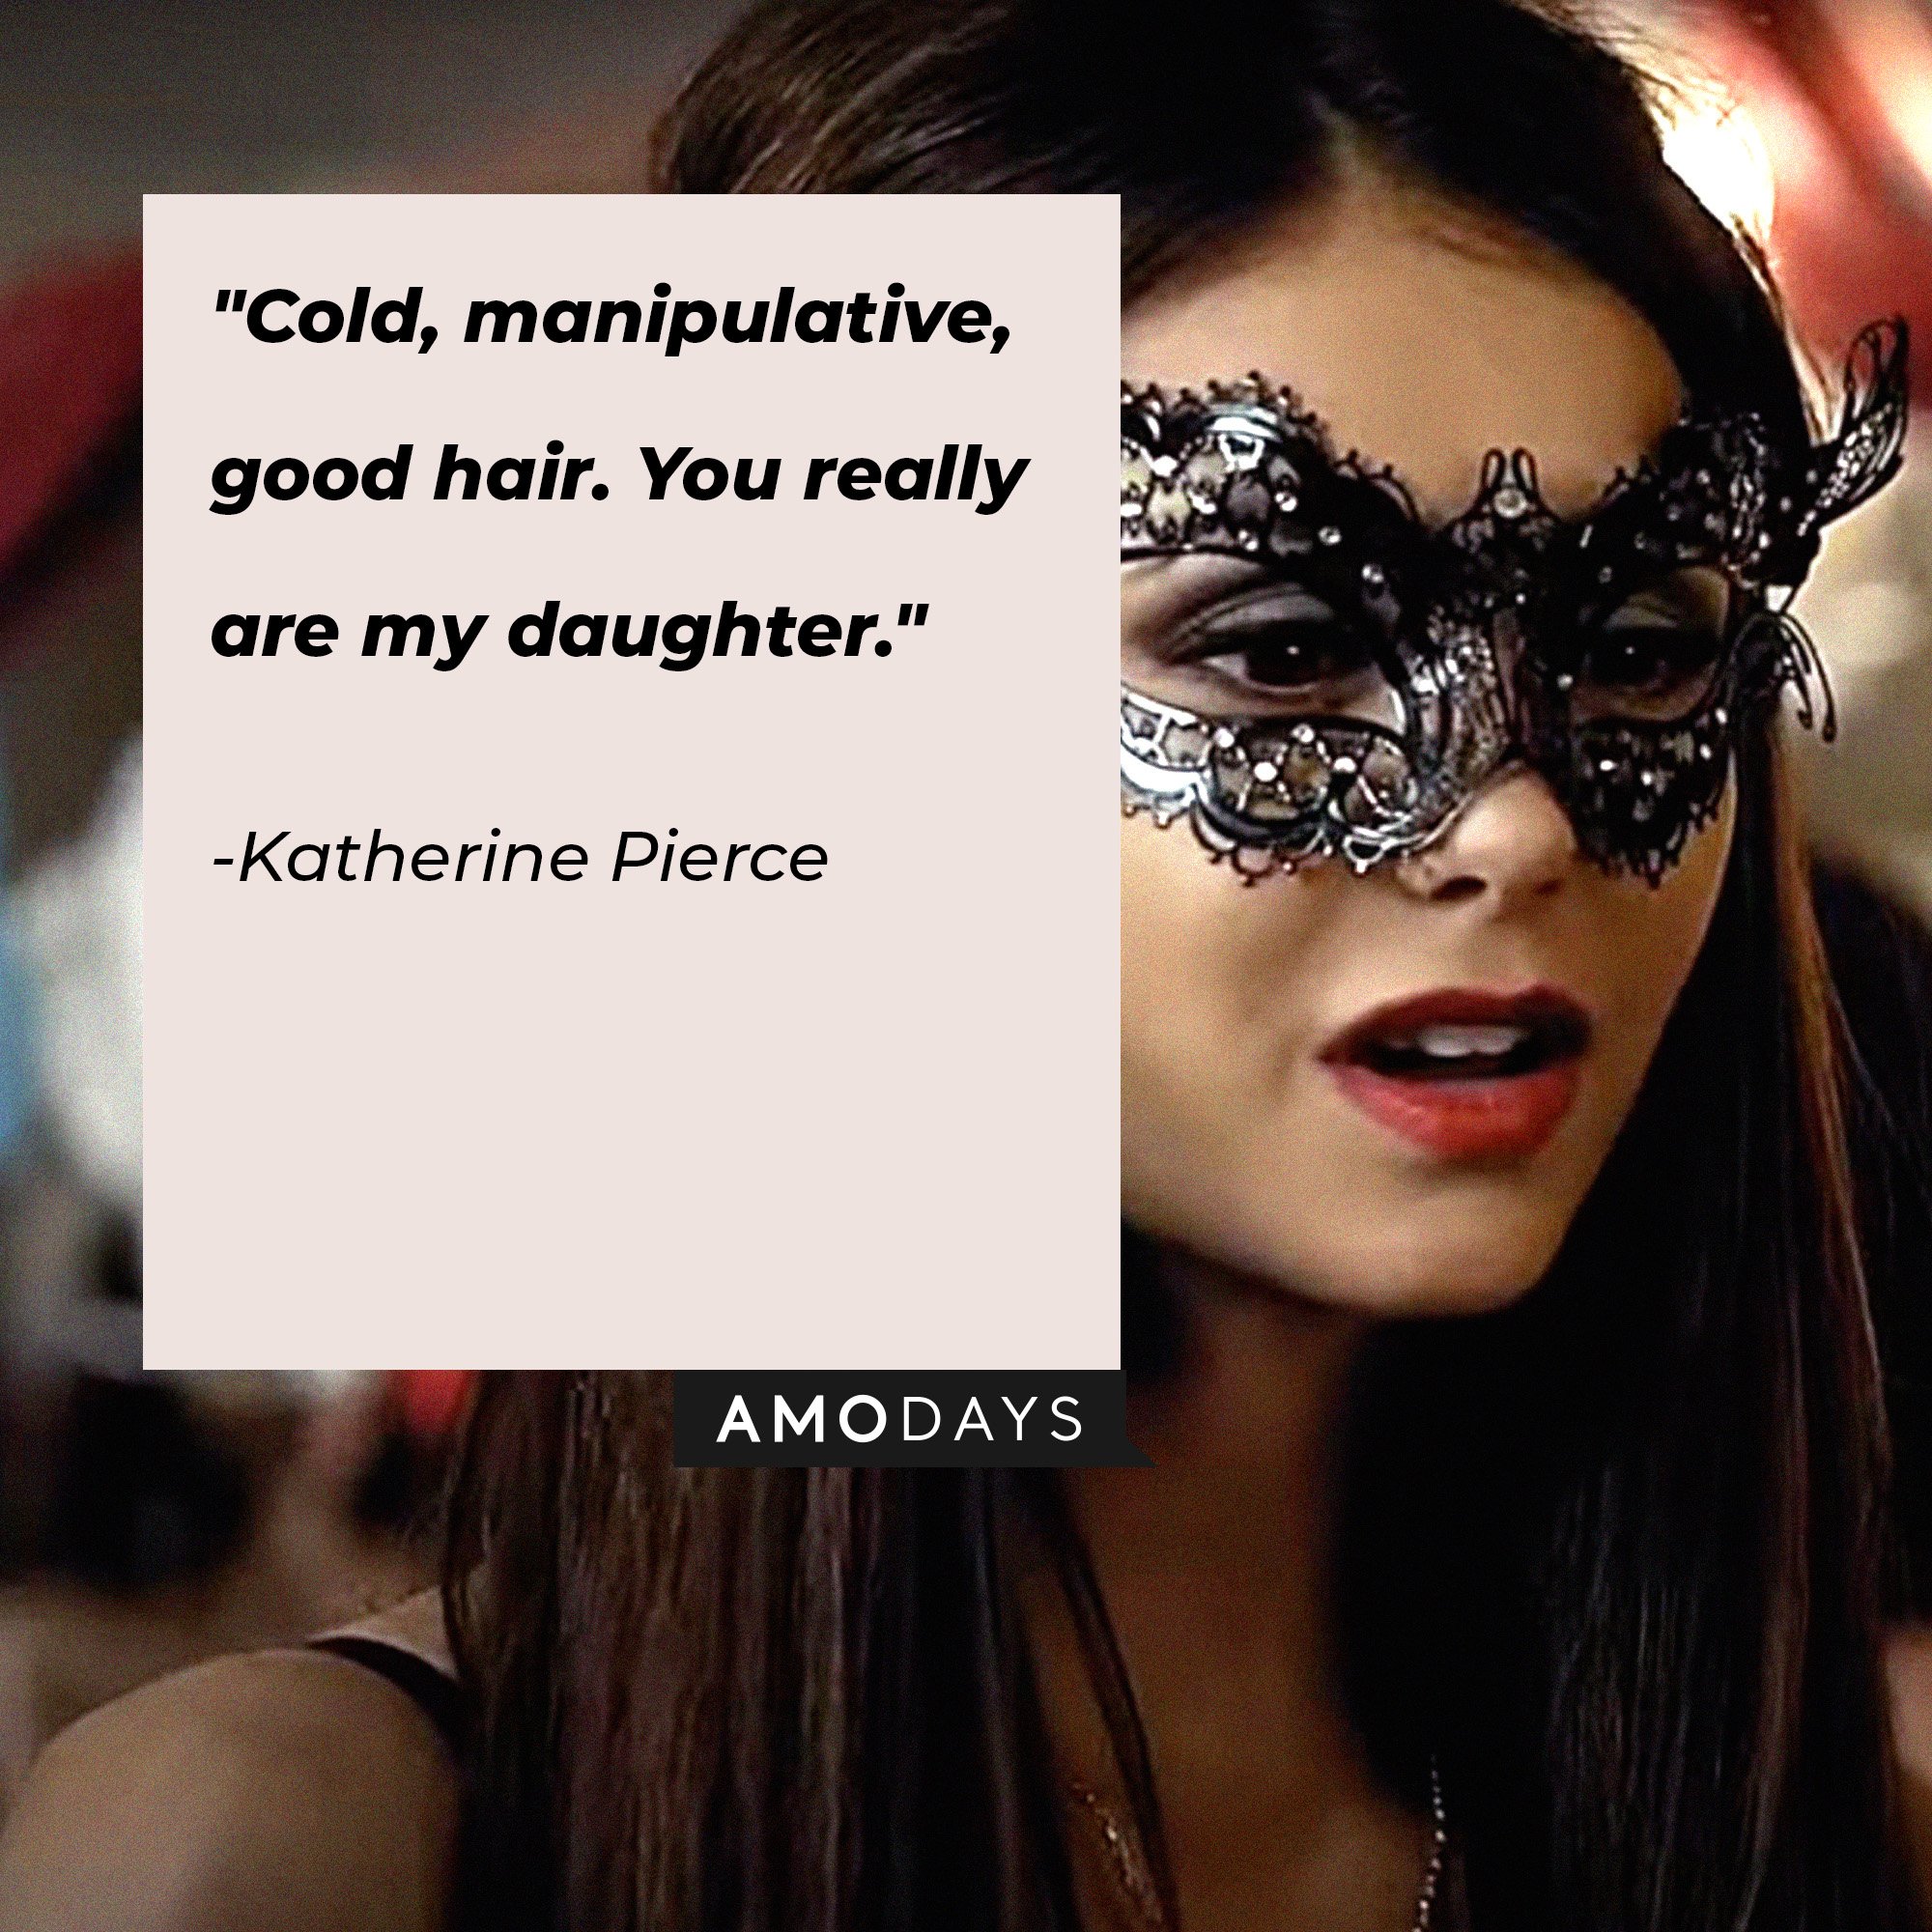 Katherine Pierce's quote: "Cold, manipulative, good hair. You really are my daughter." | Image: AmoDays